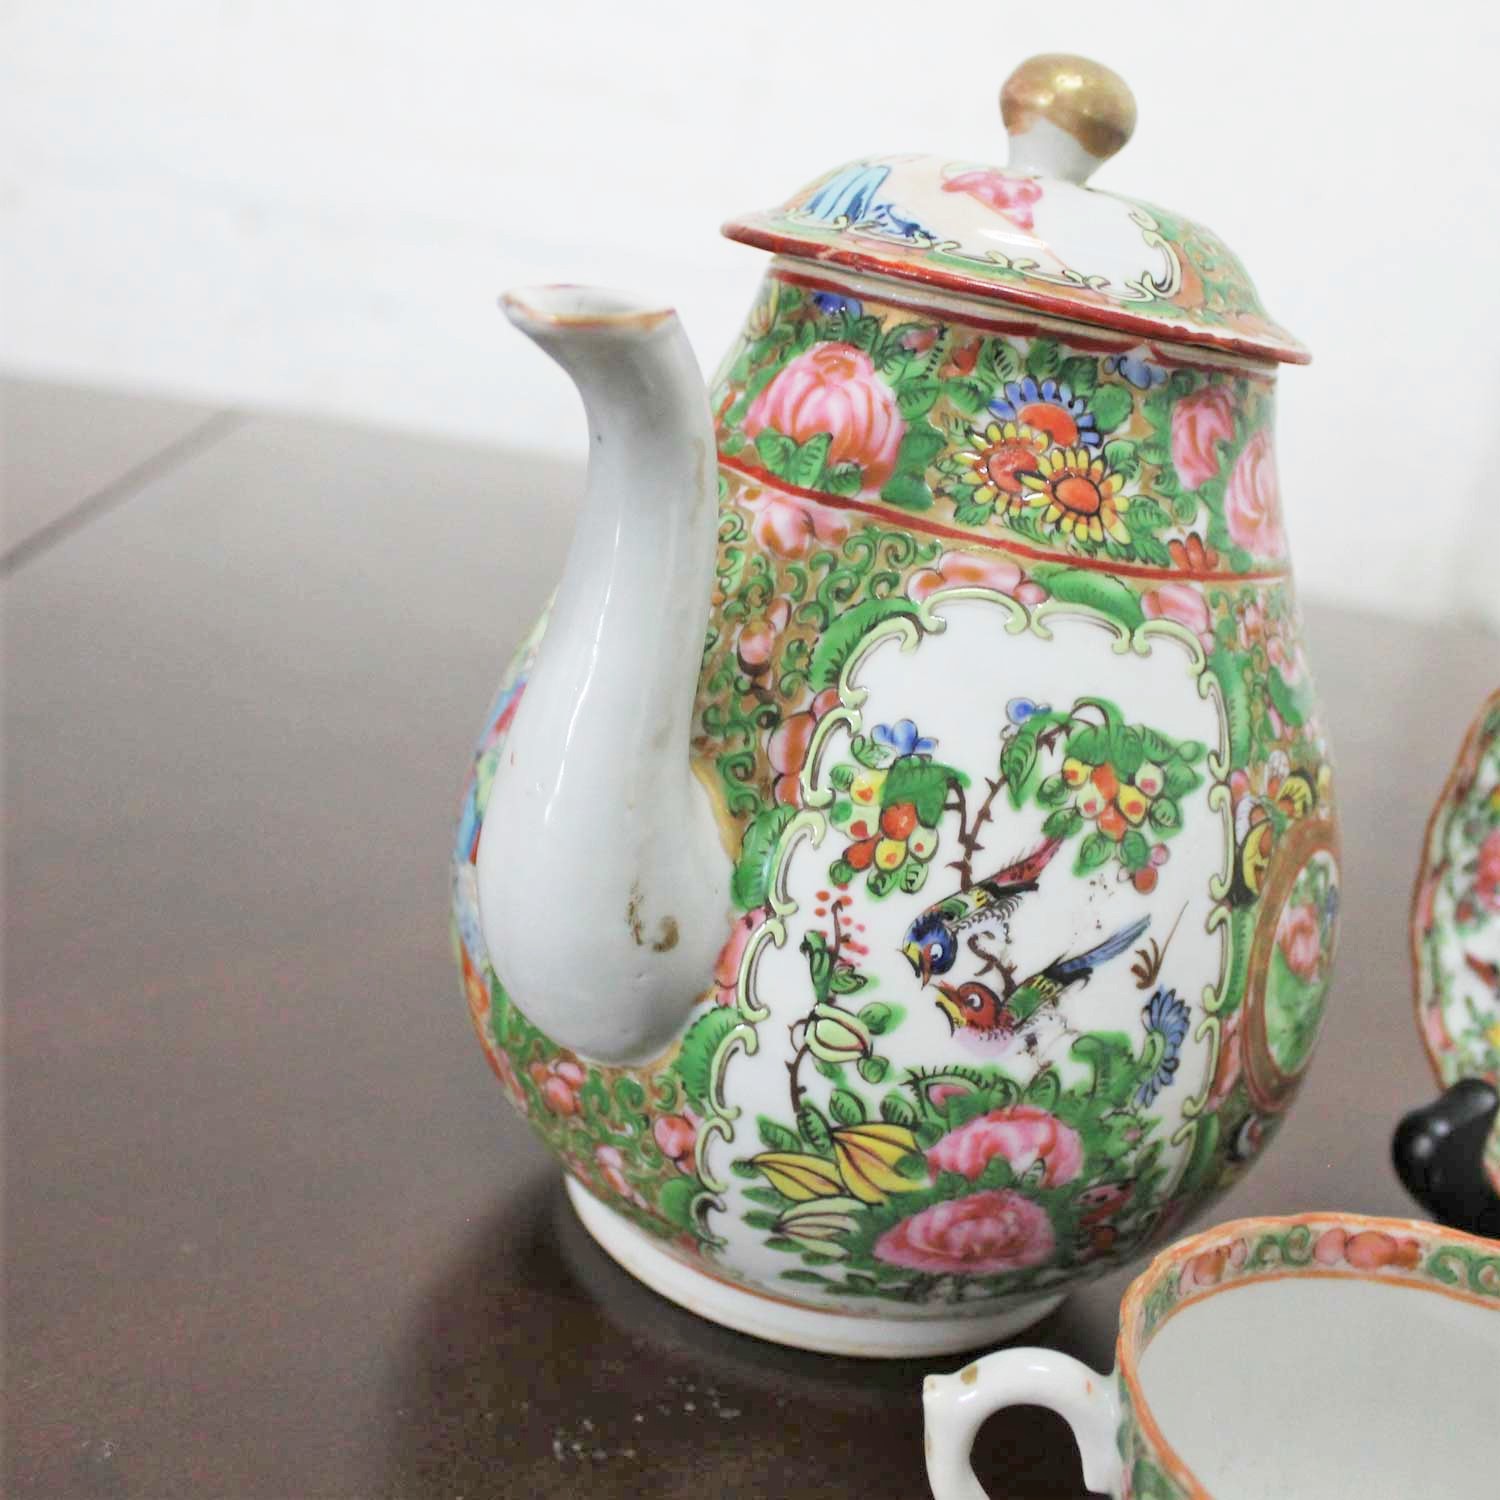 Antique Chinese Qing Rose Medallion Porcelain Teapot with Single Teacup and Saucer